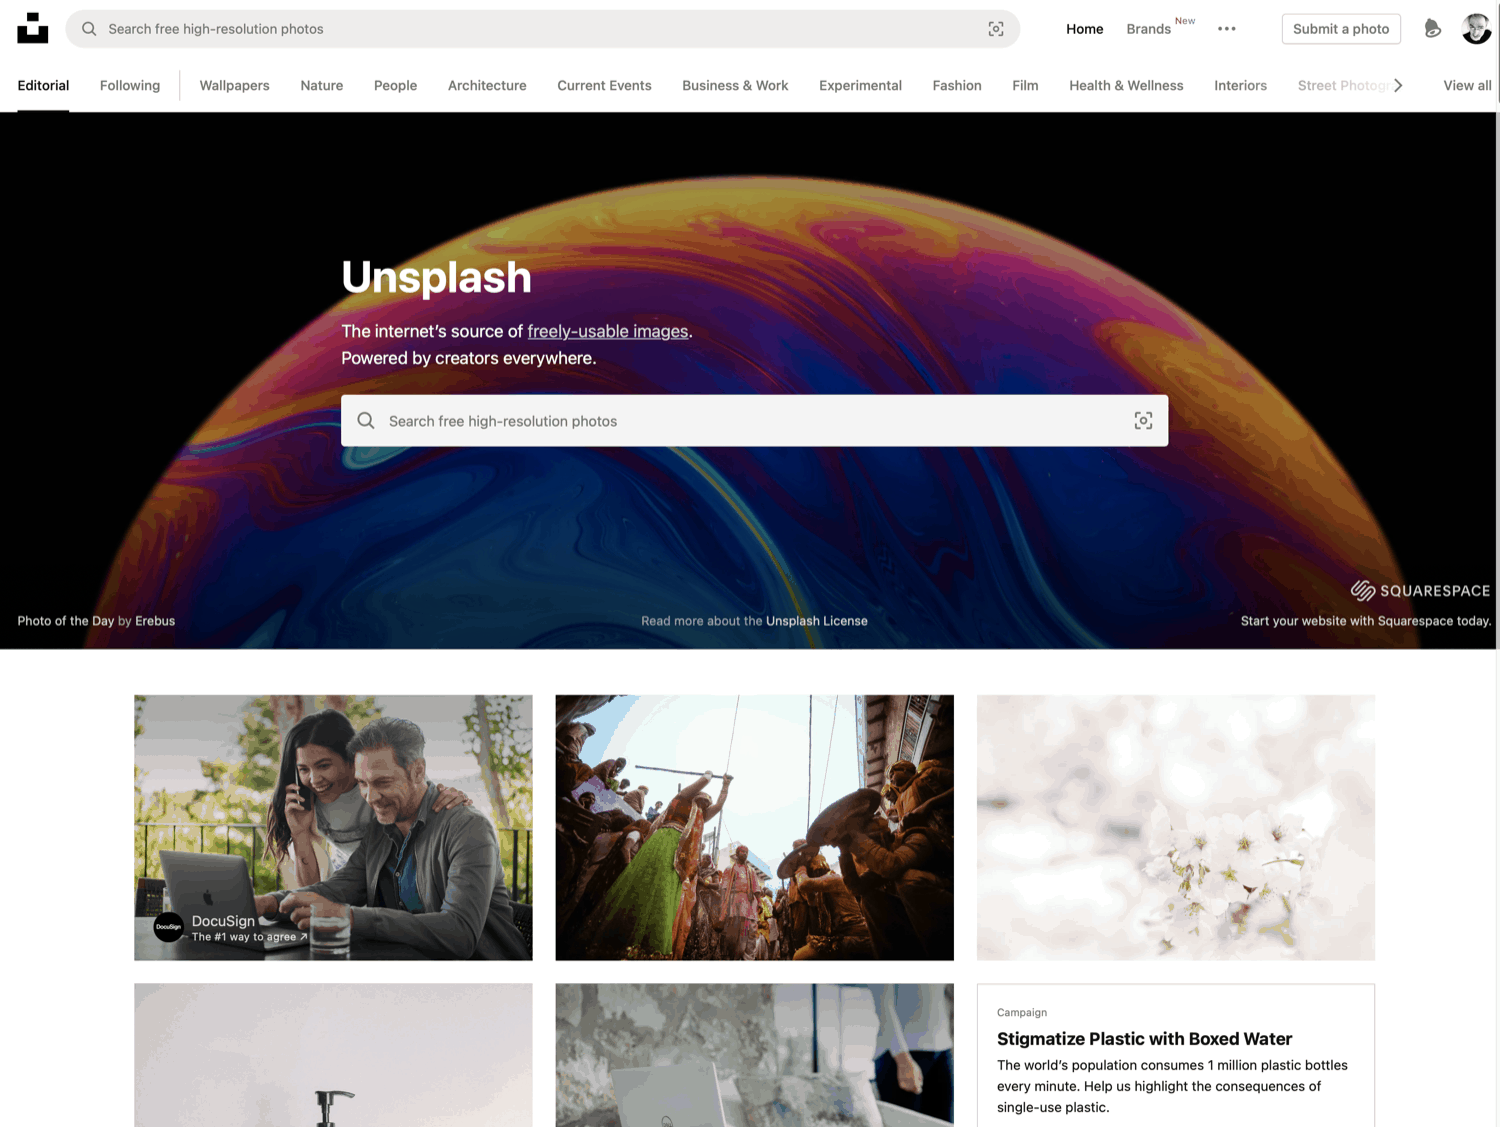 Getty Images to Acquire Unsplash